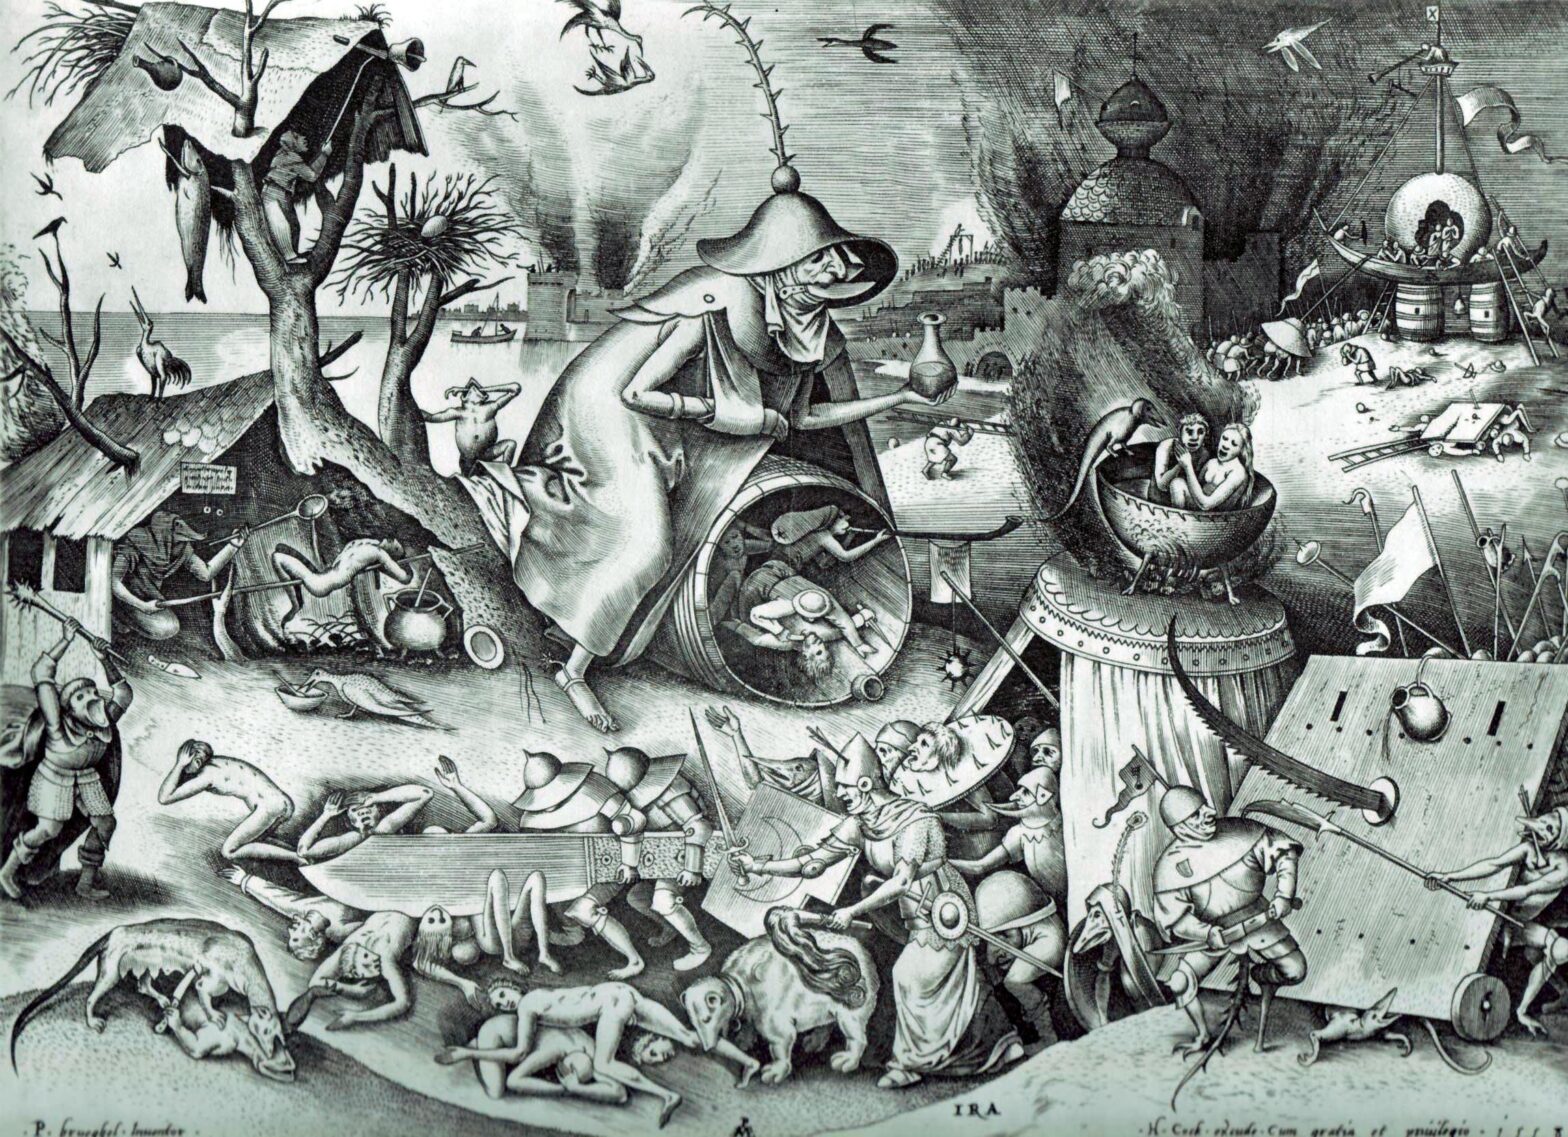 Pieter Bruegel the Elder: The Seven Deadly Sins or the Seven Vices – Ira